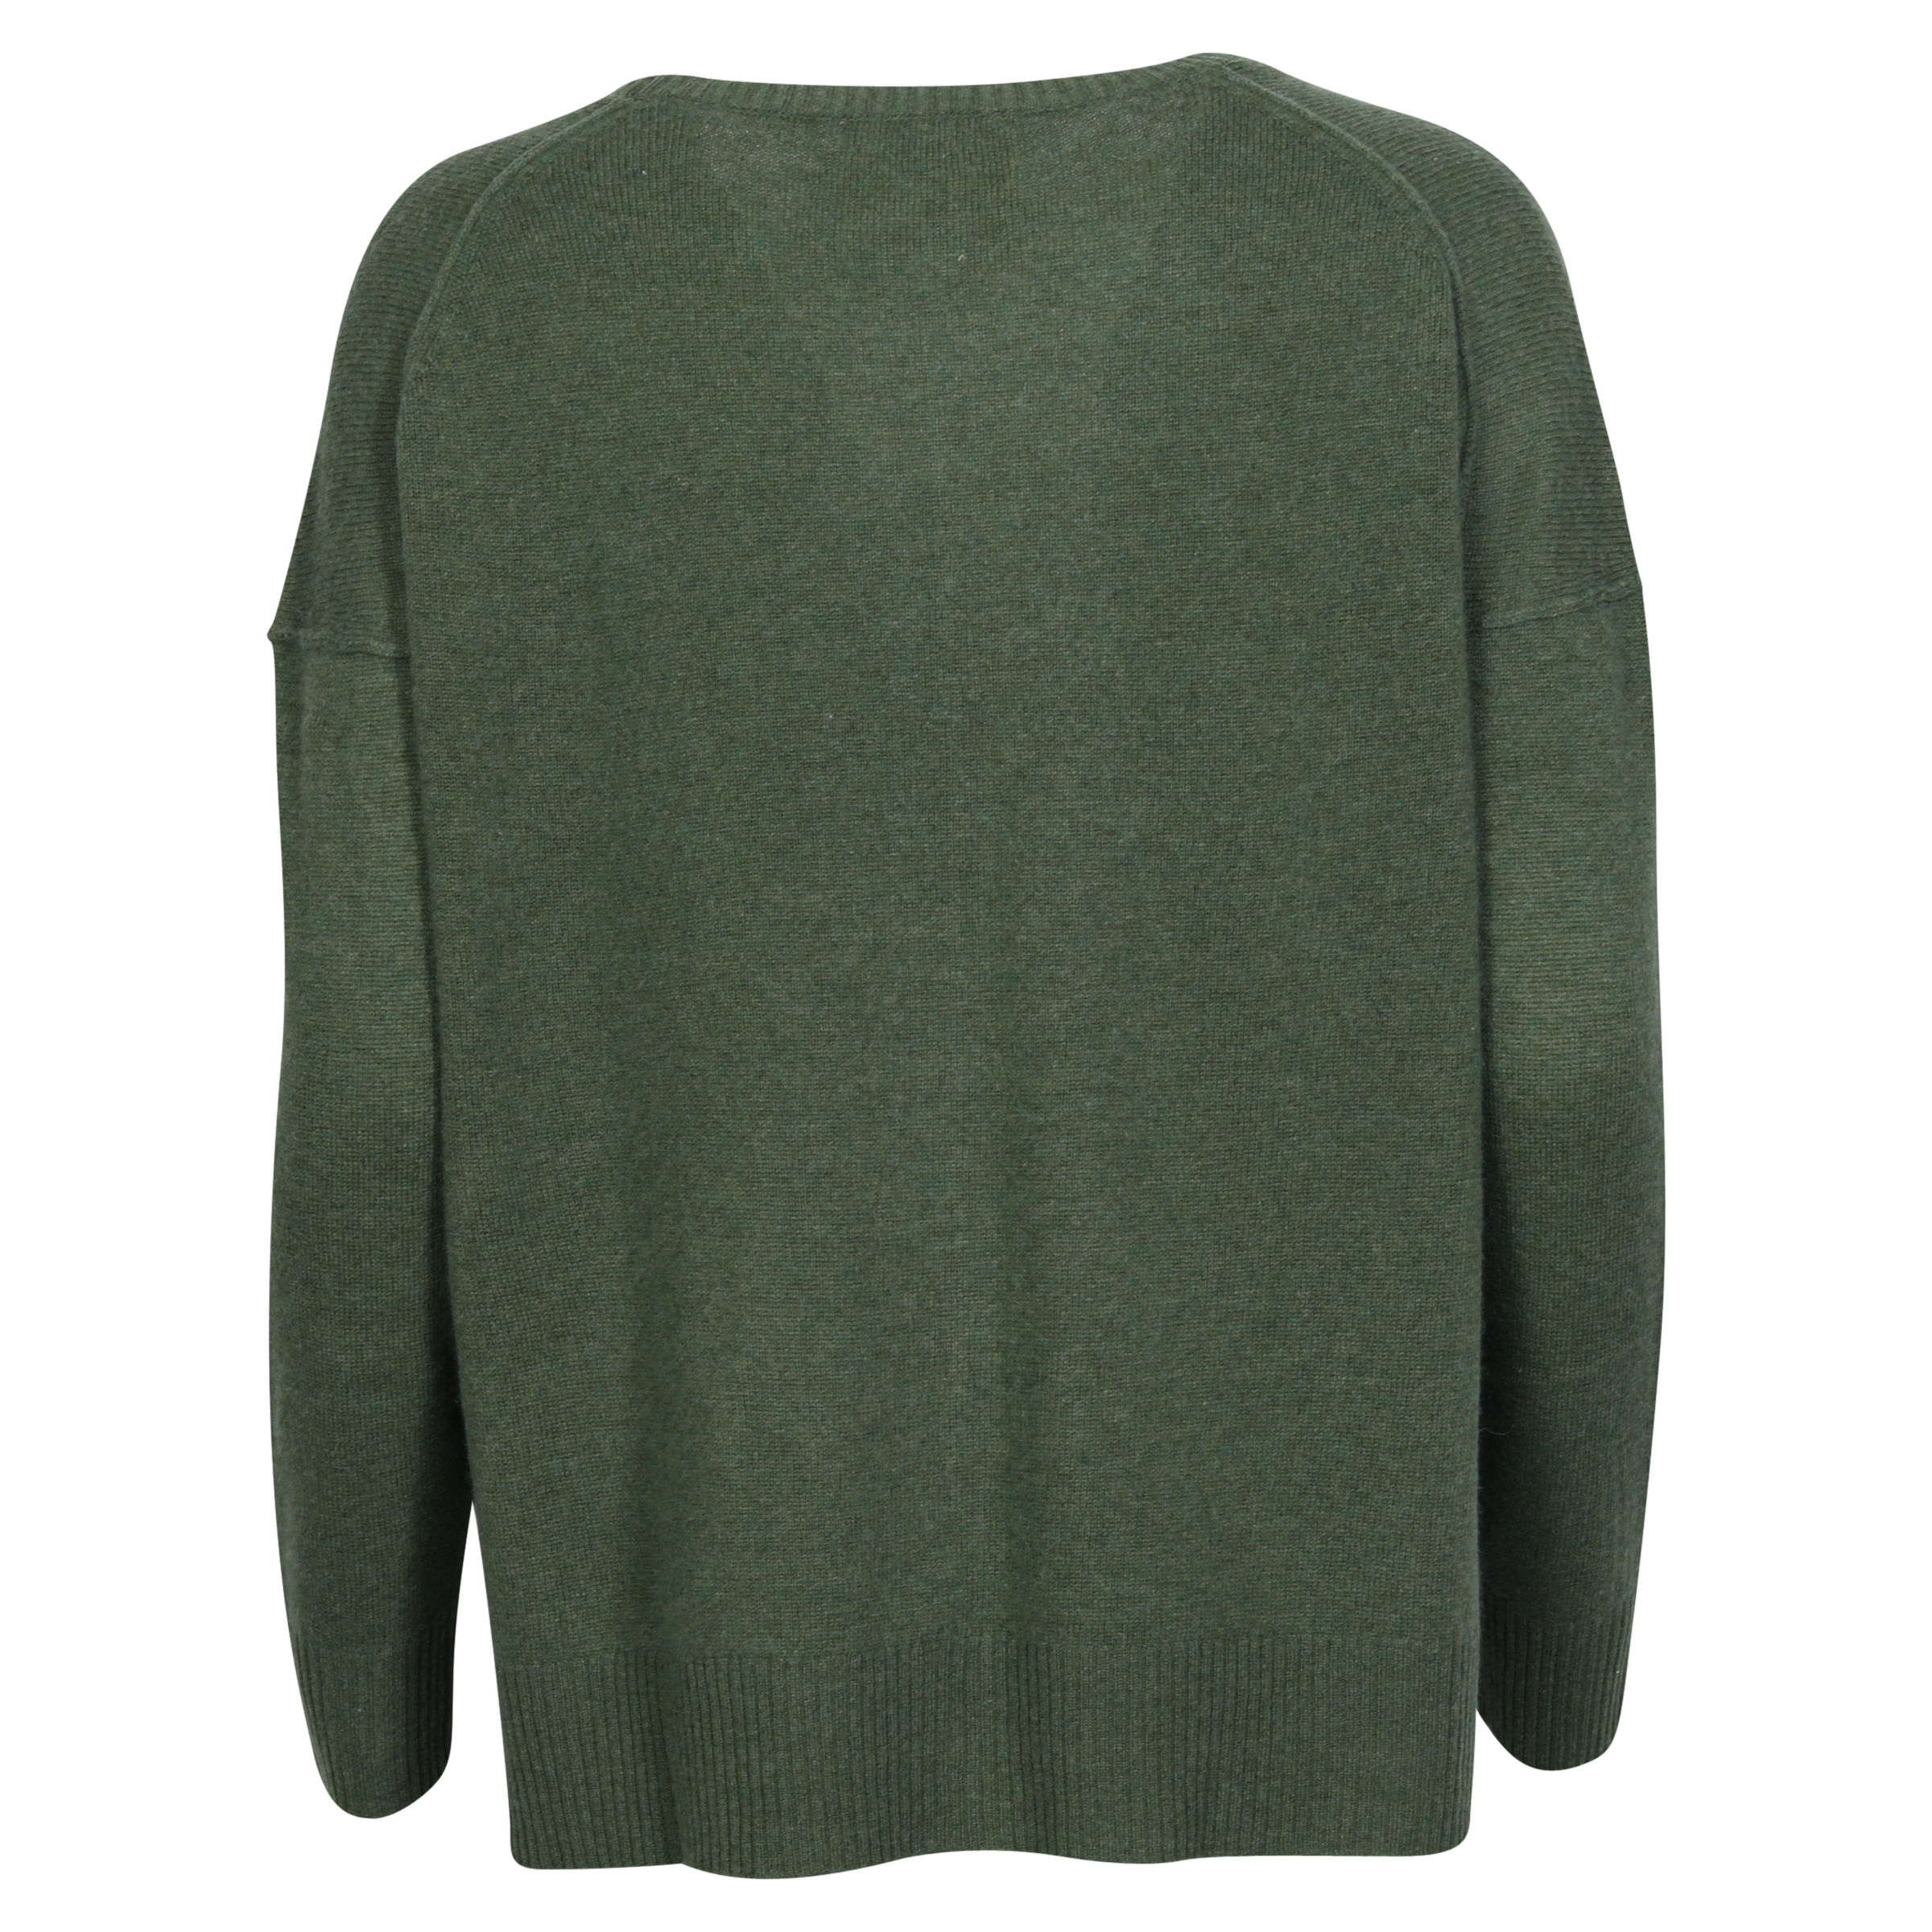 Absolut Cashmere Oversized Sweater Kenza Olive S